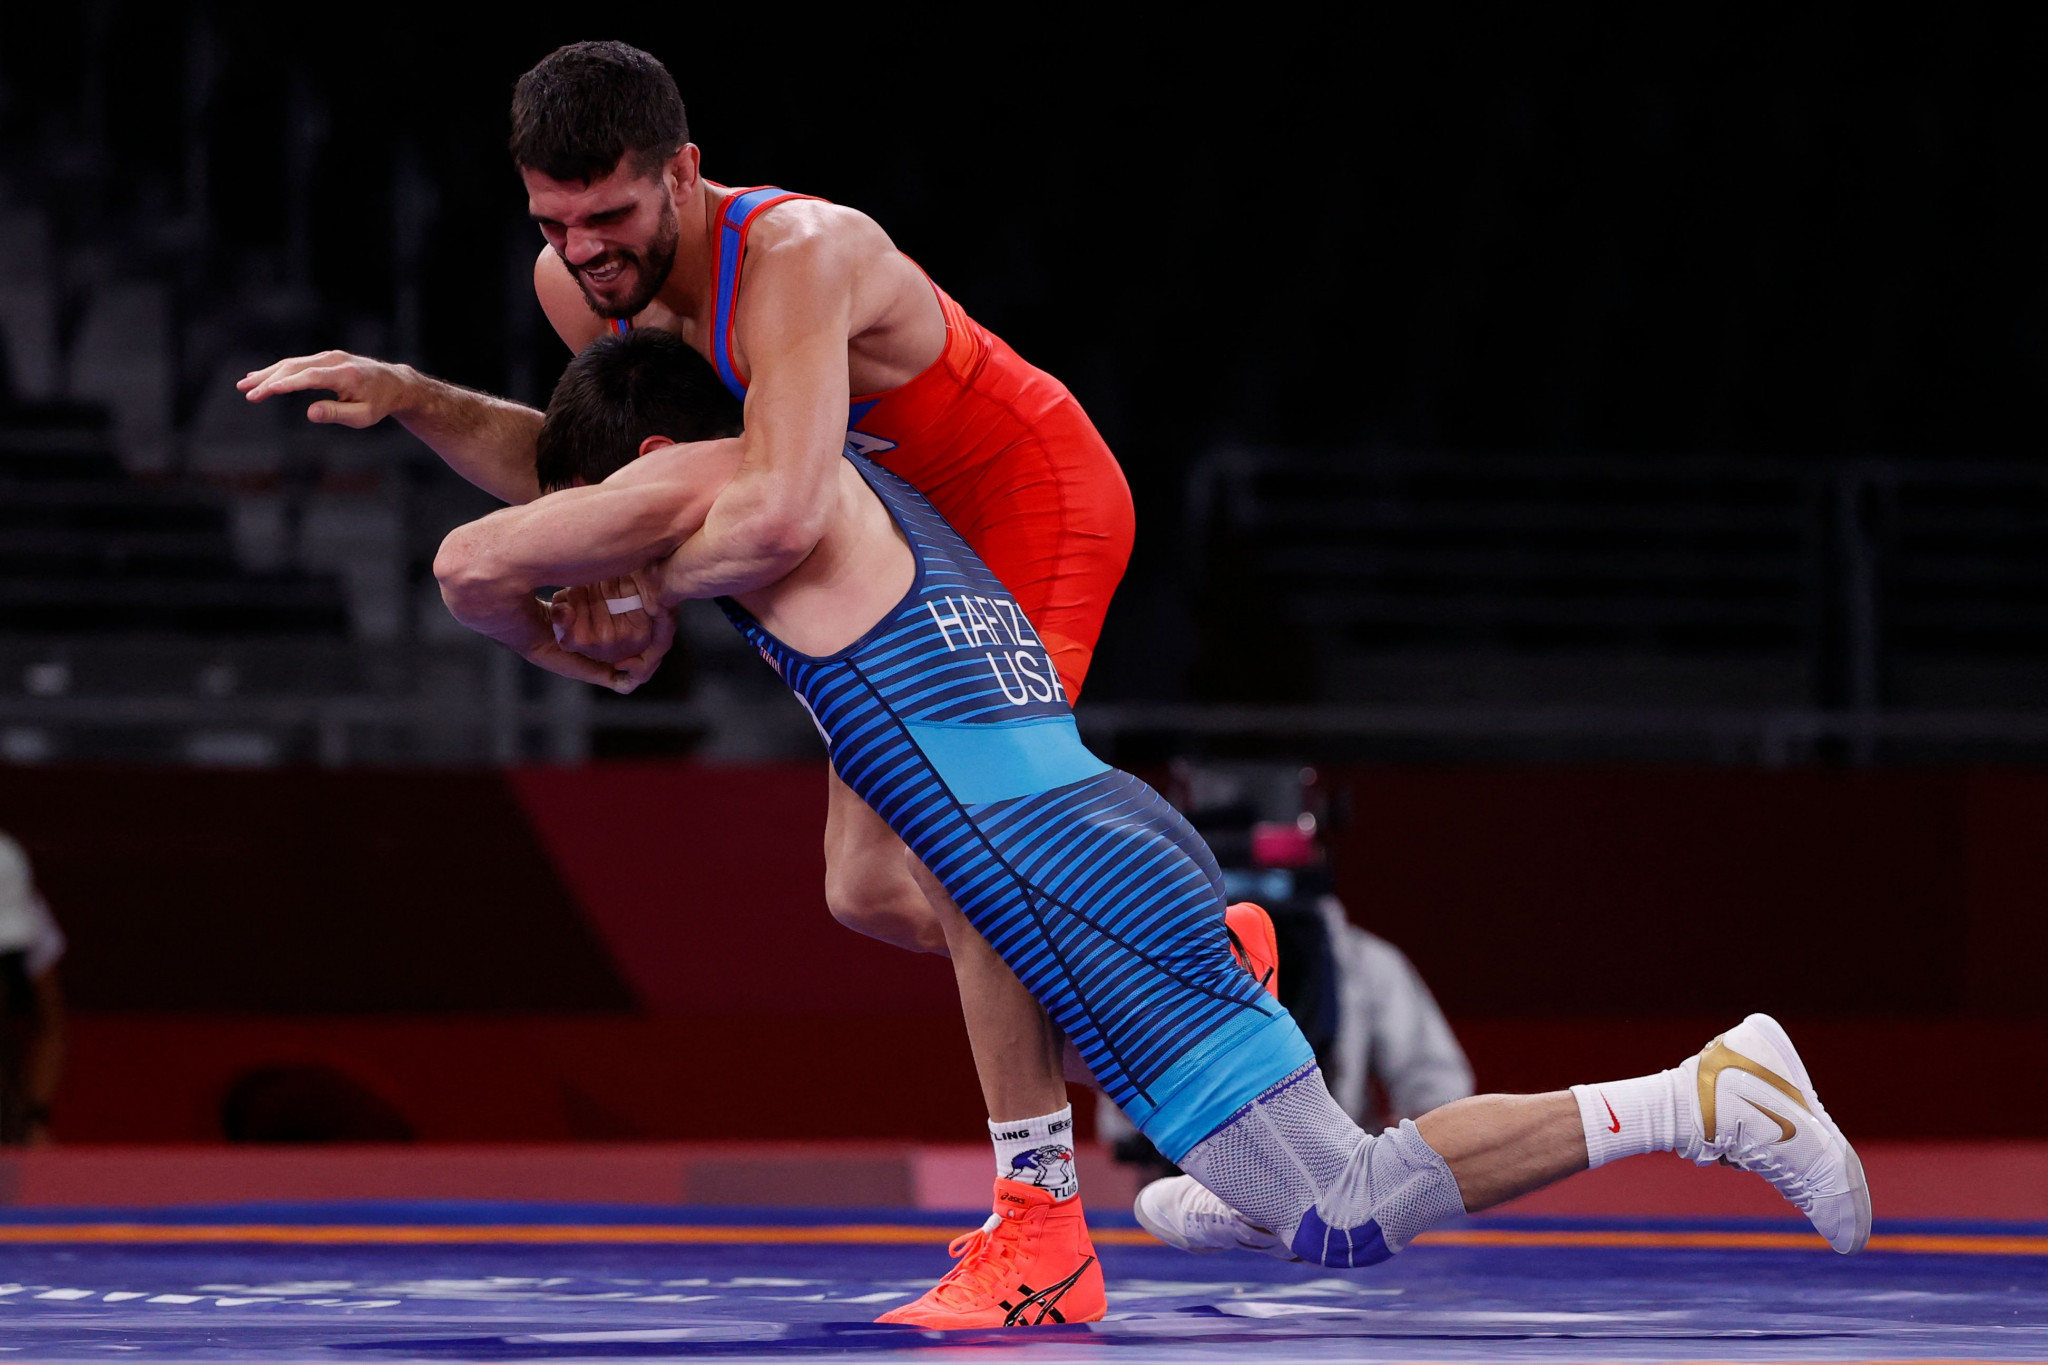 Luis Orta Sanchez, in red, is one of the favourites to medal at the World Wrestling Championships in Belgrade ©Getty Images